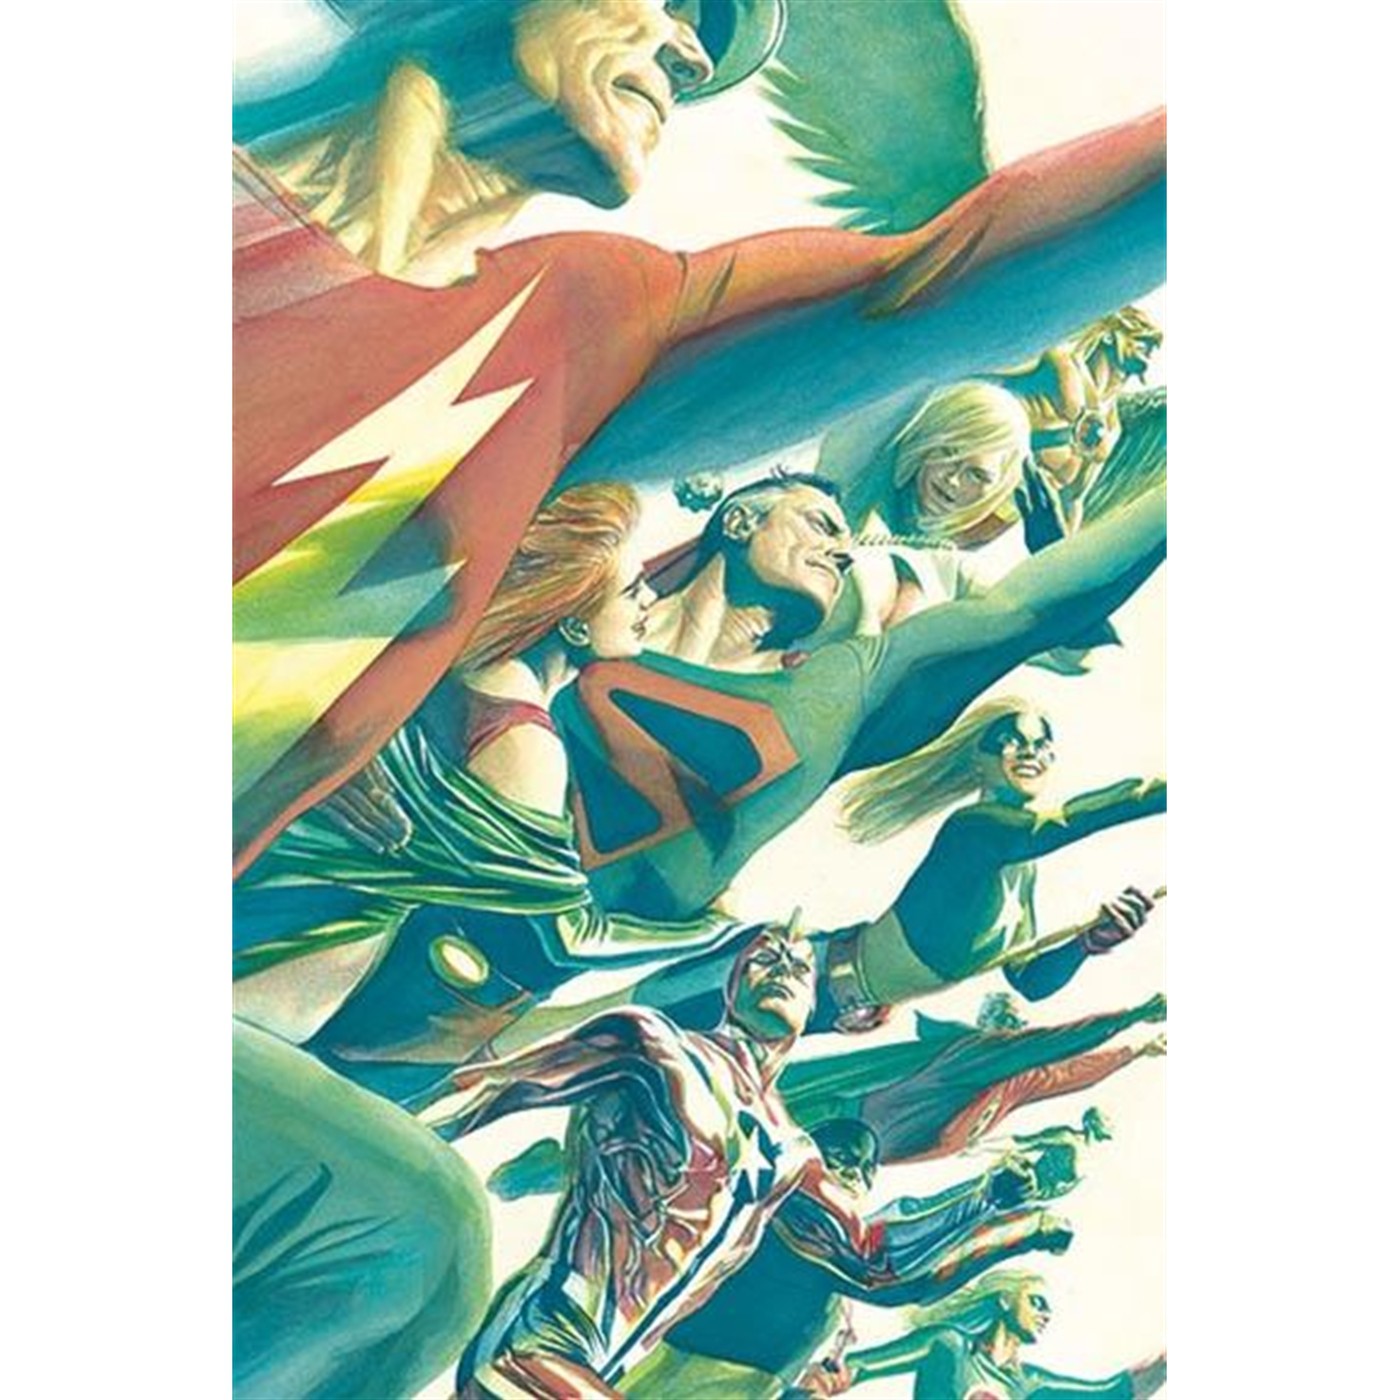 Justice Society #11 Heroes Poster by Alex Ross